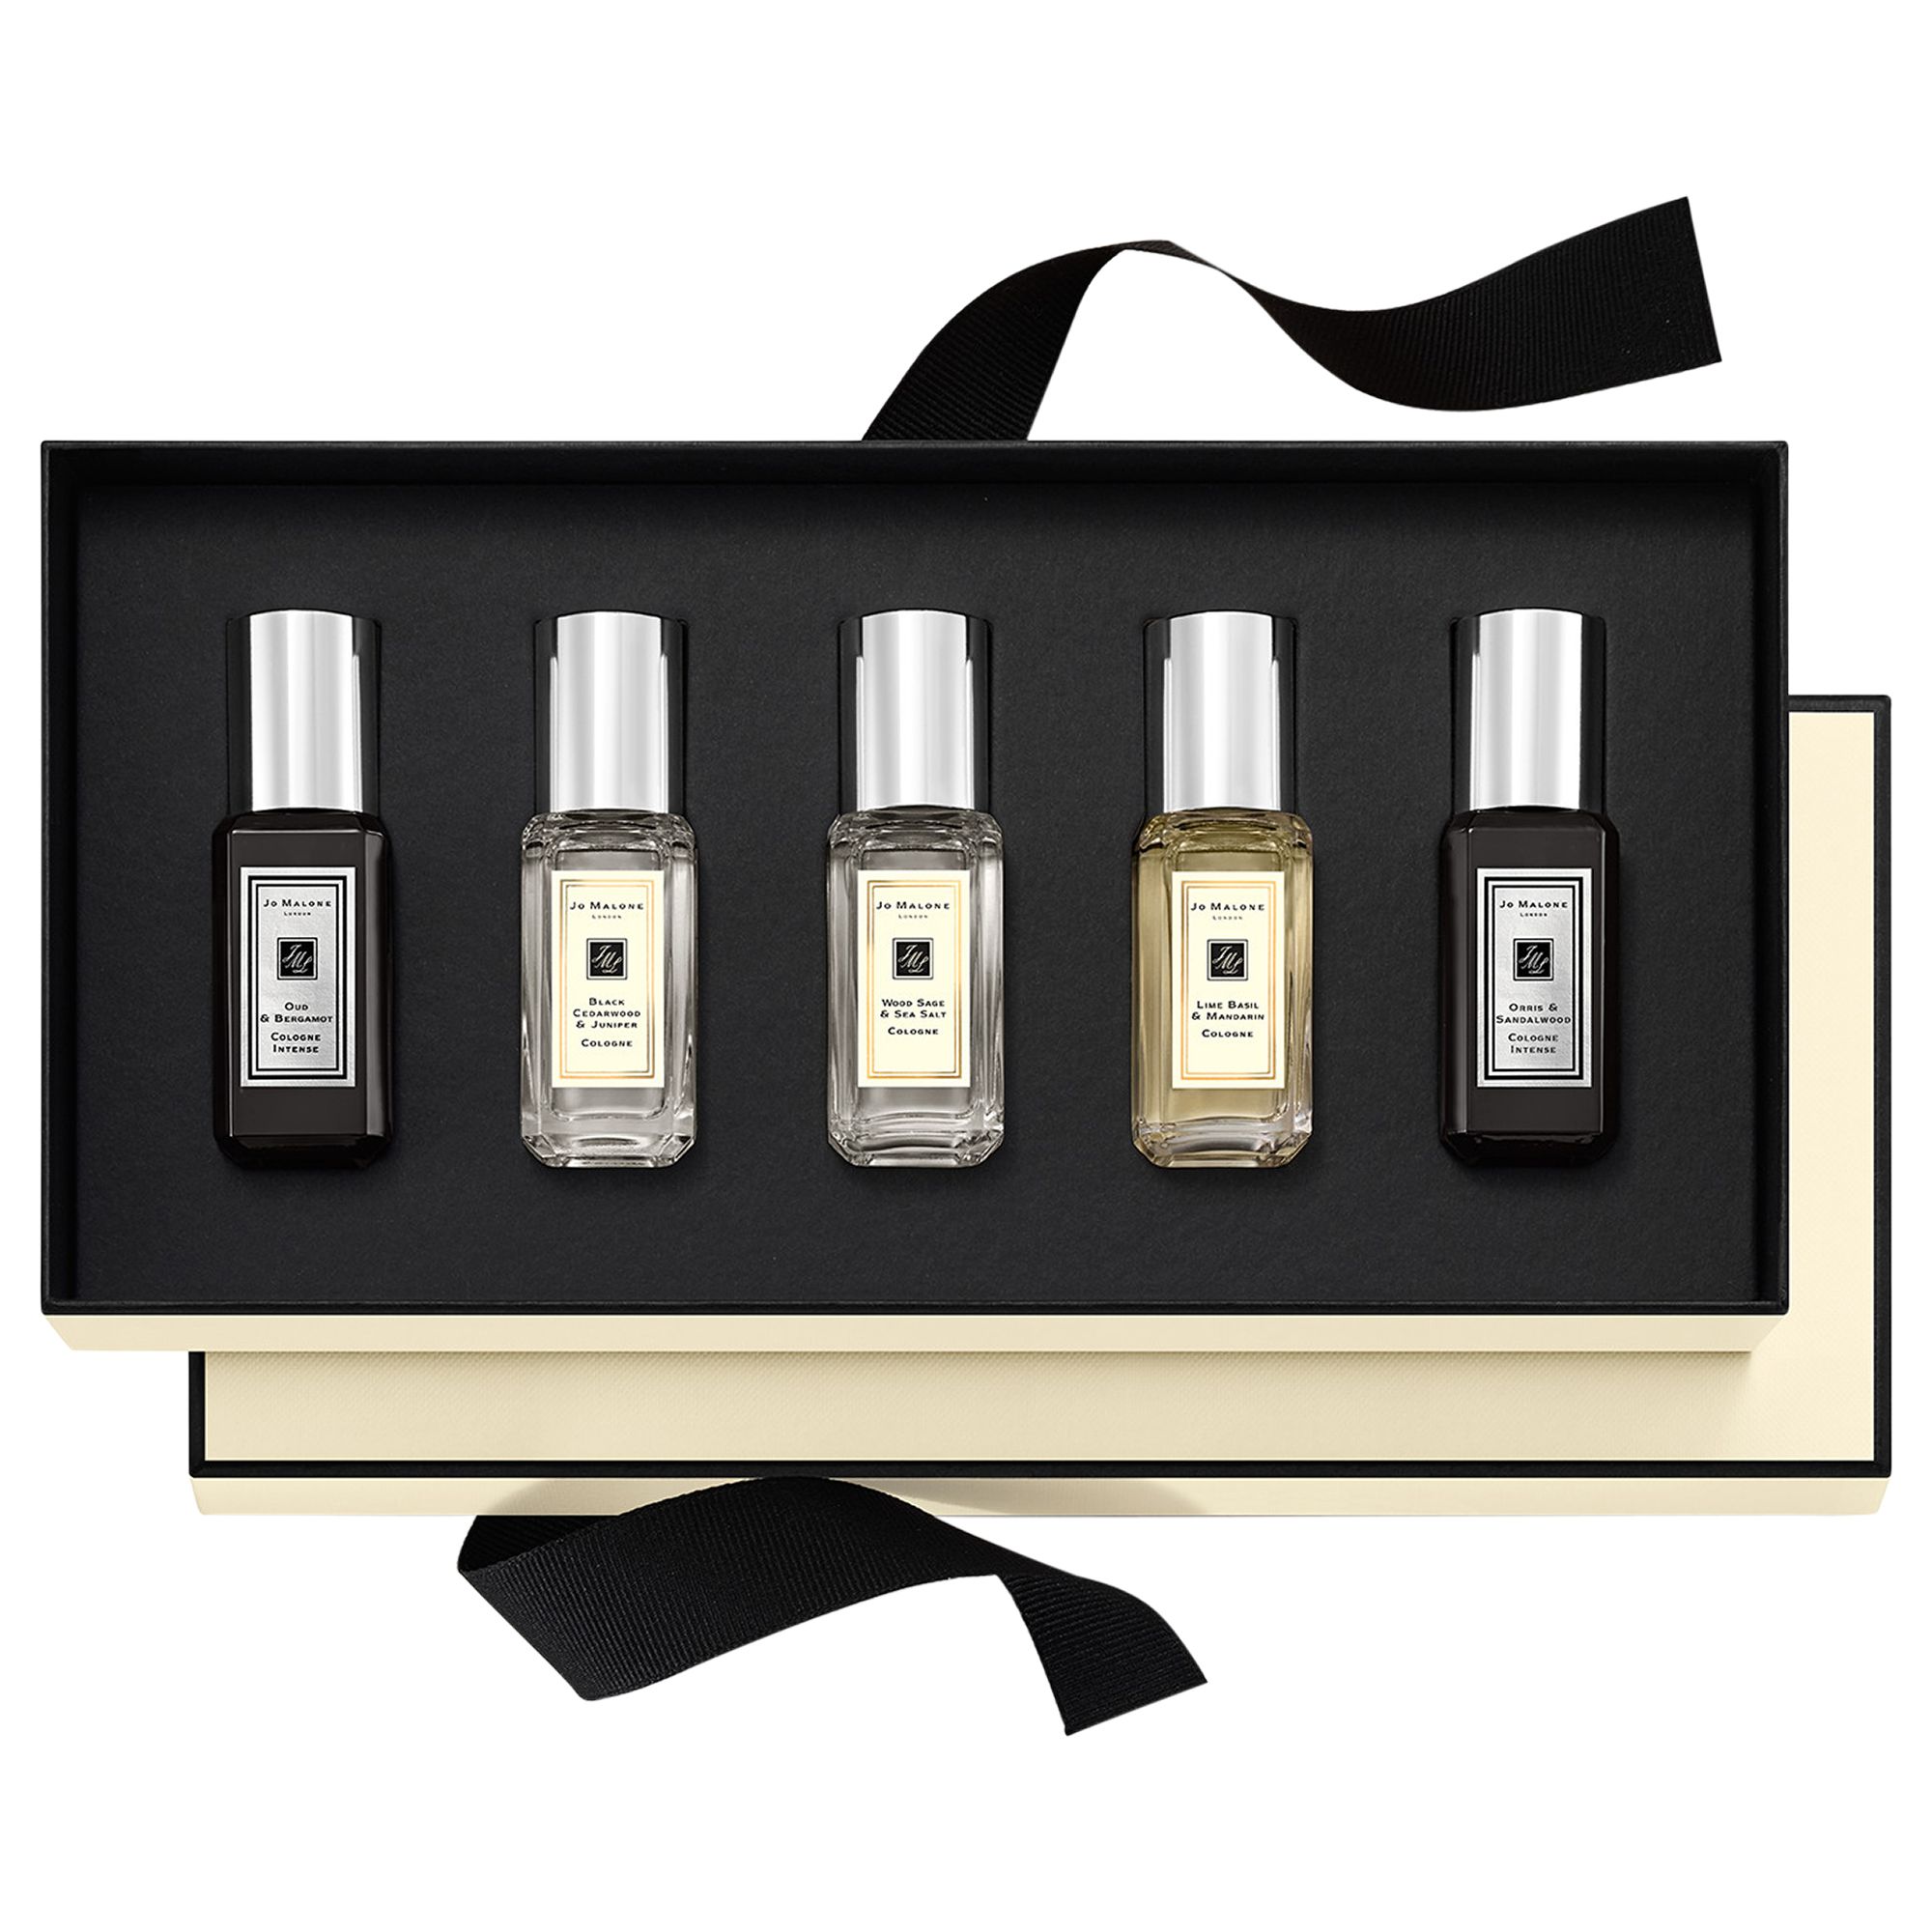 Jo Malone London Men's Cologne Collection at John Lewis & Partners